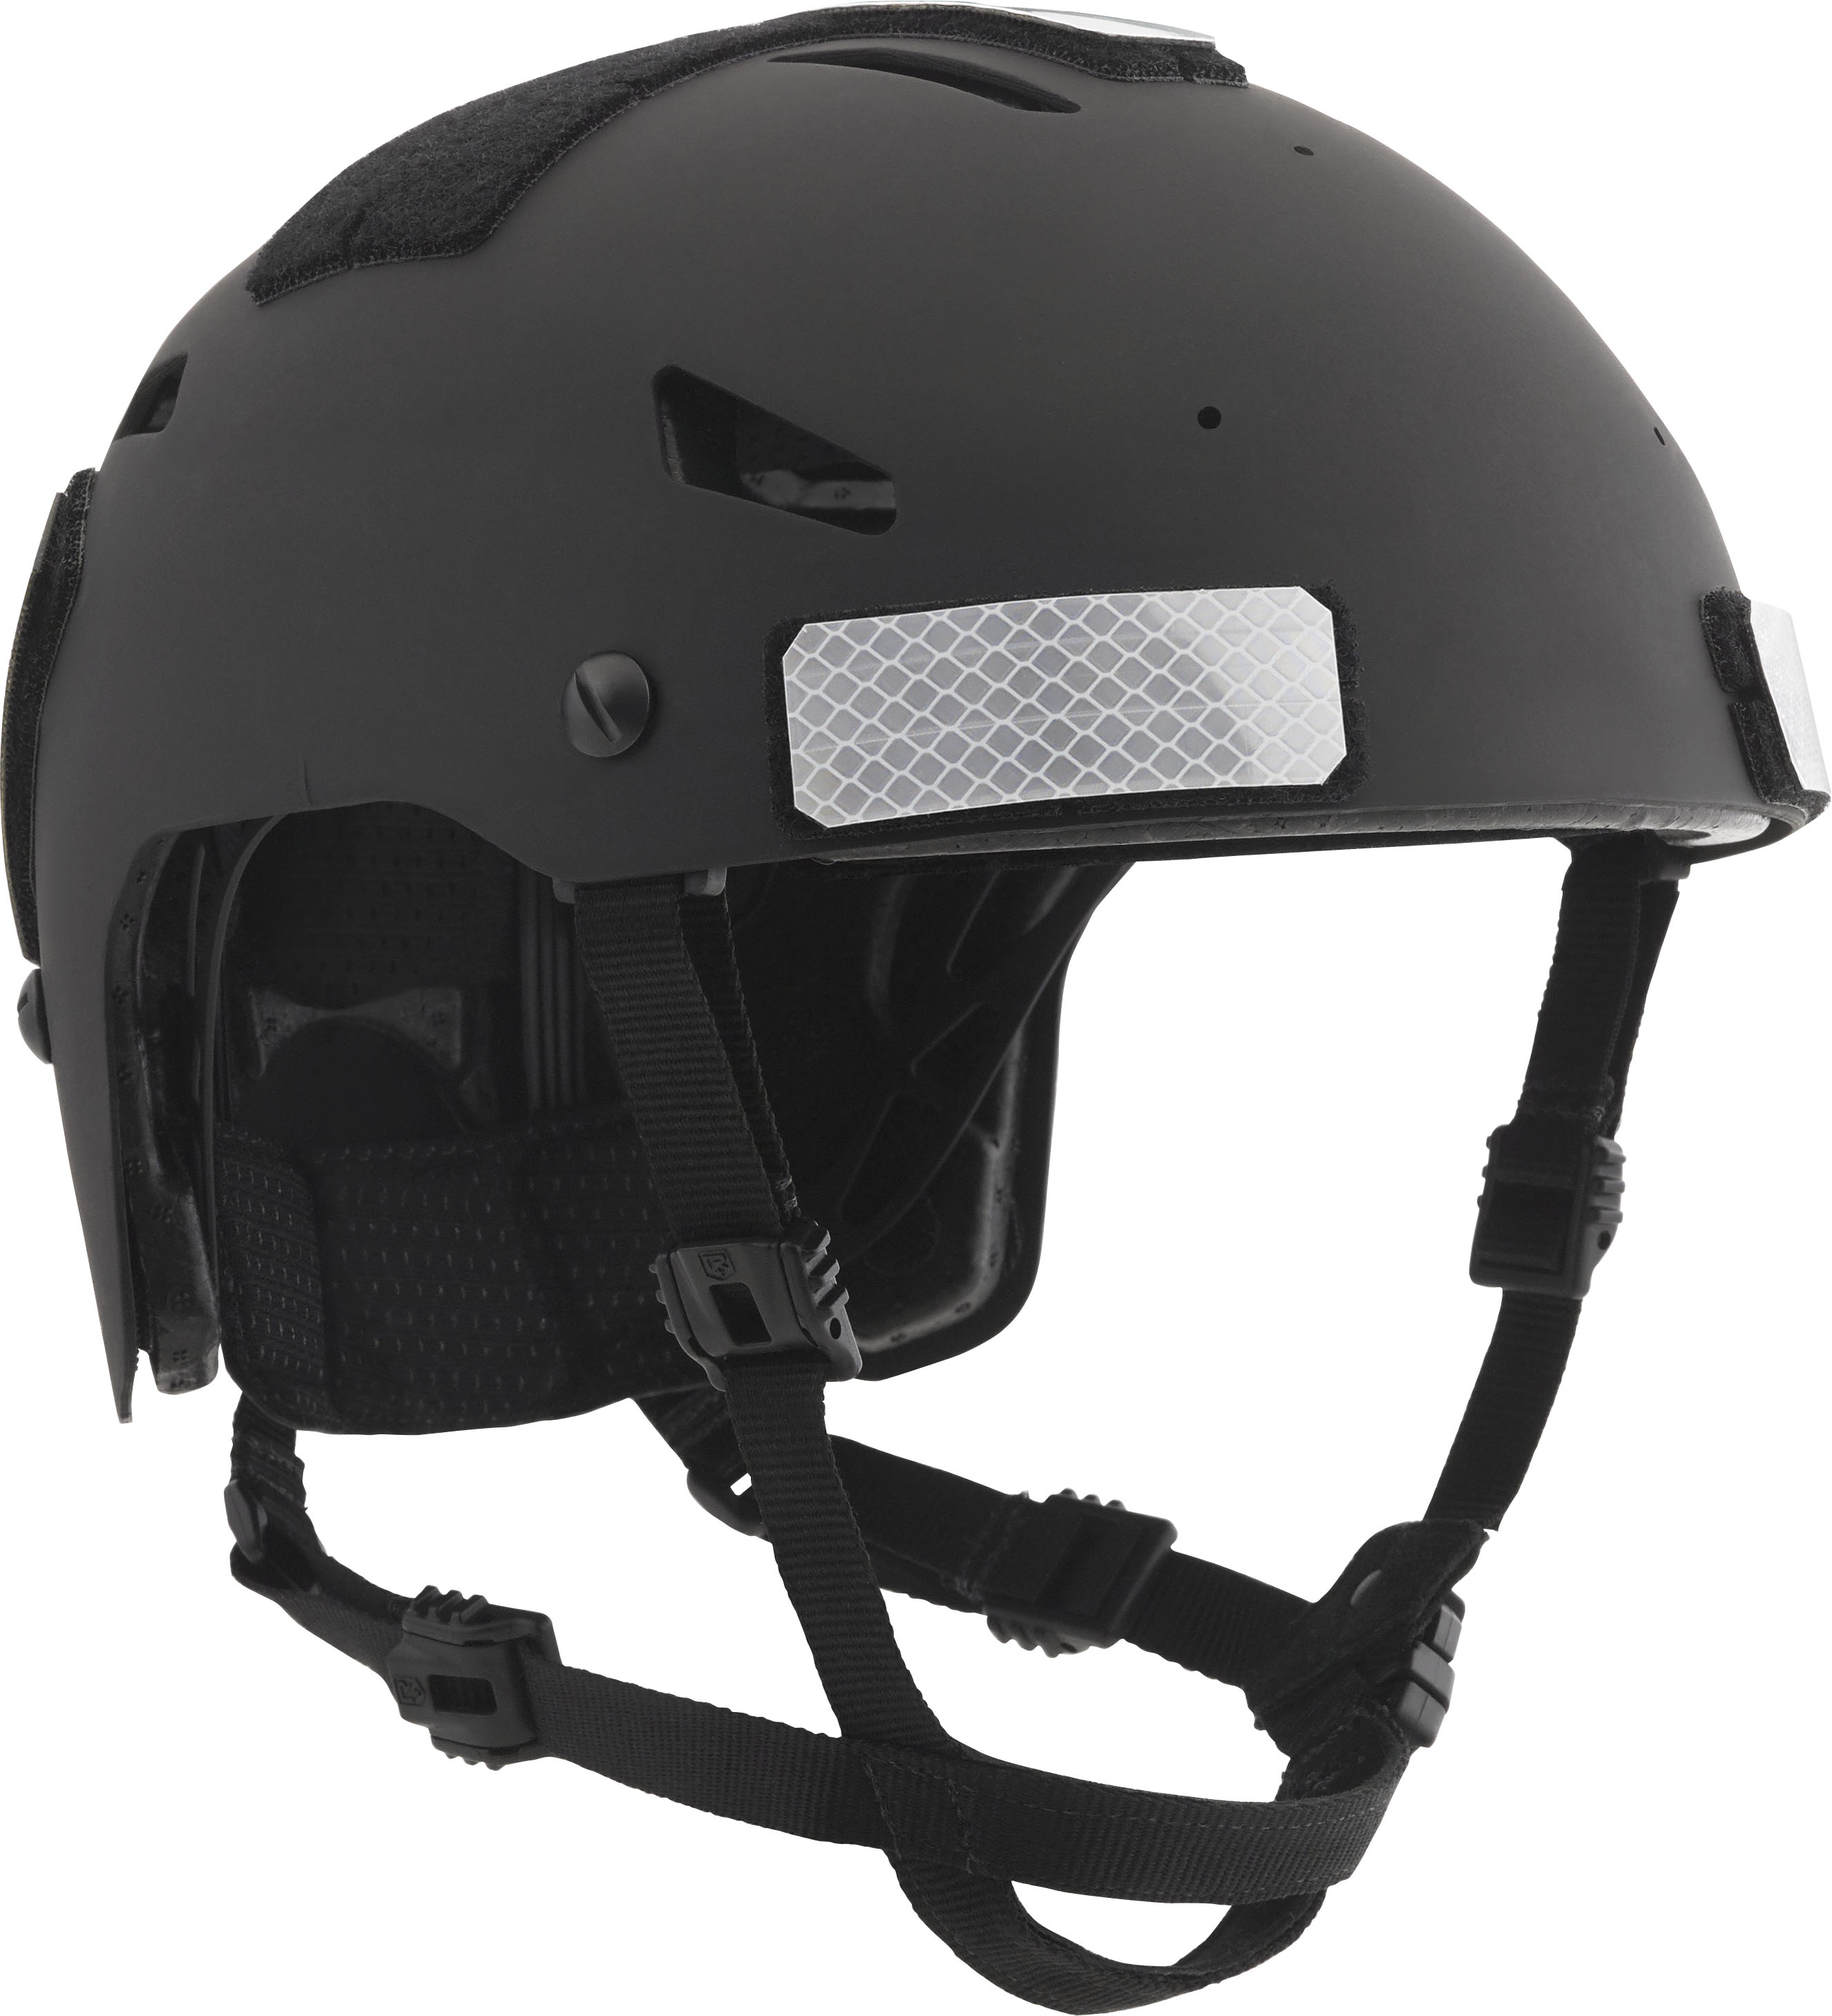 Revision’s Batlskin Caiman™ Boat Crew Bump Head System will be delivered to U.S. Boat Crew Coast Guardsmen as part of the new helmet contract.